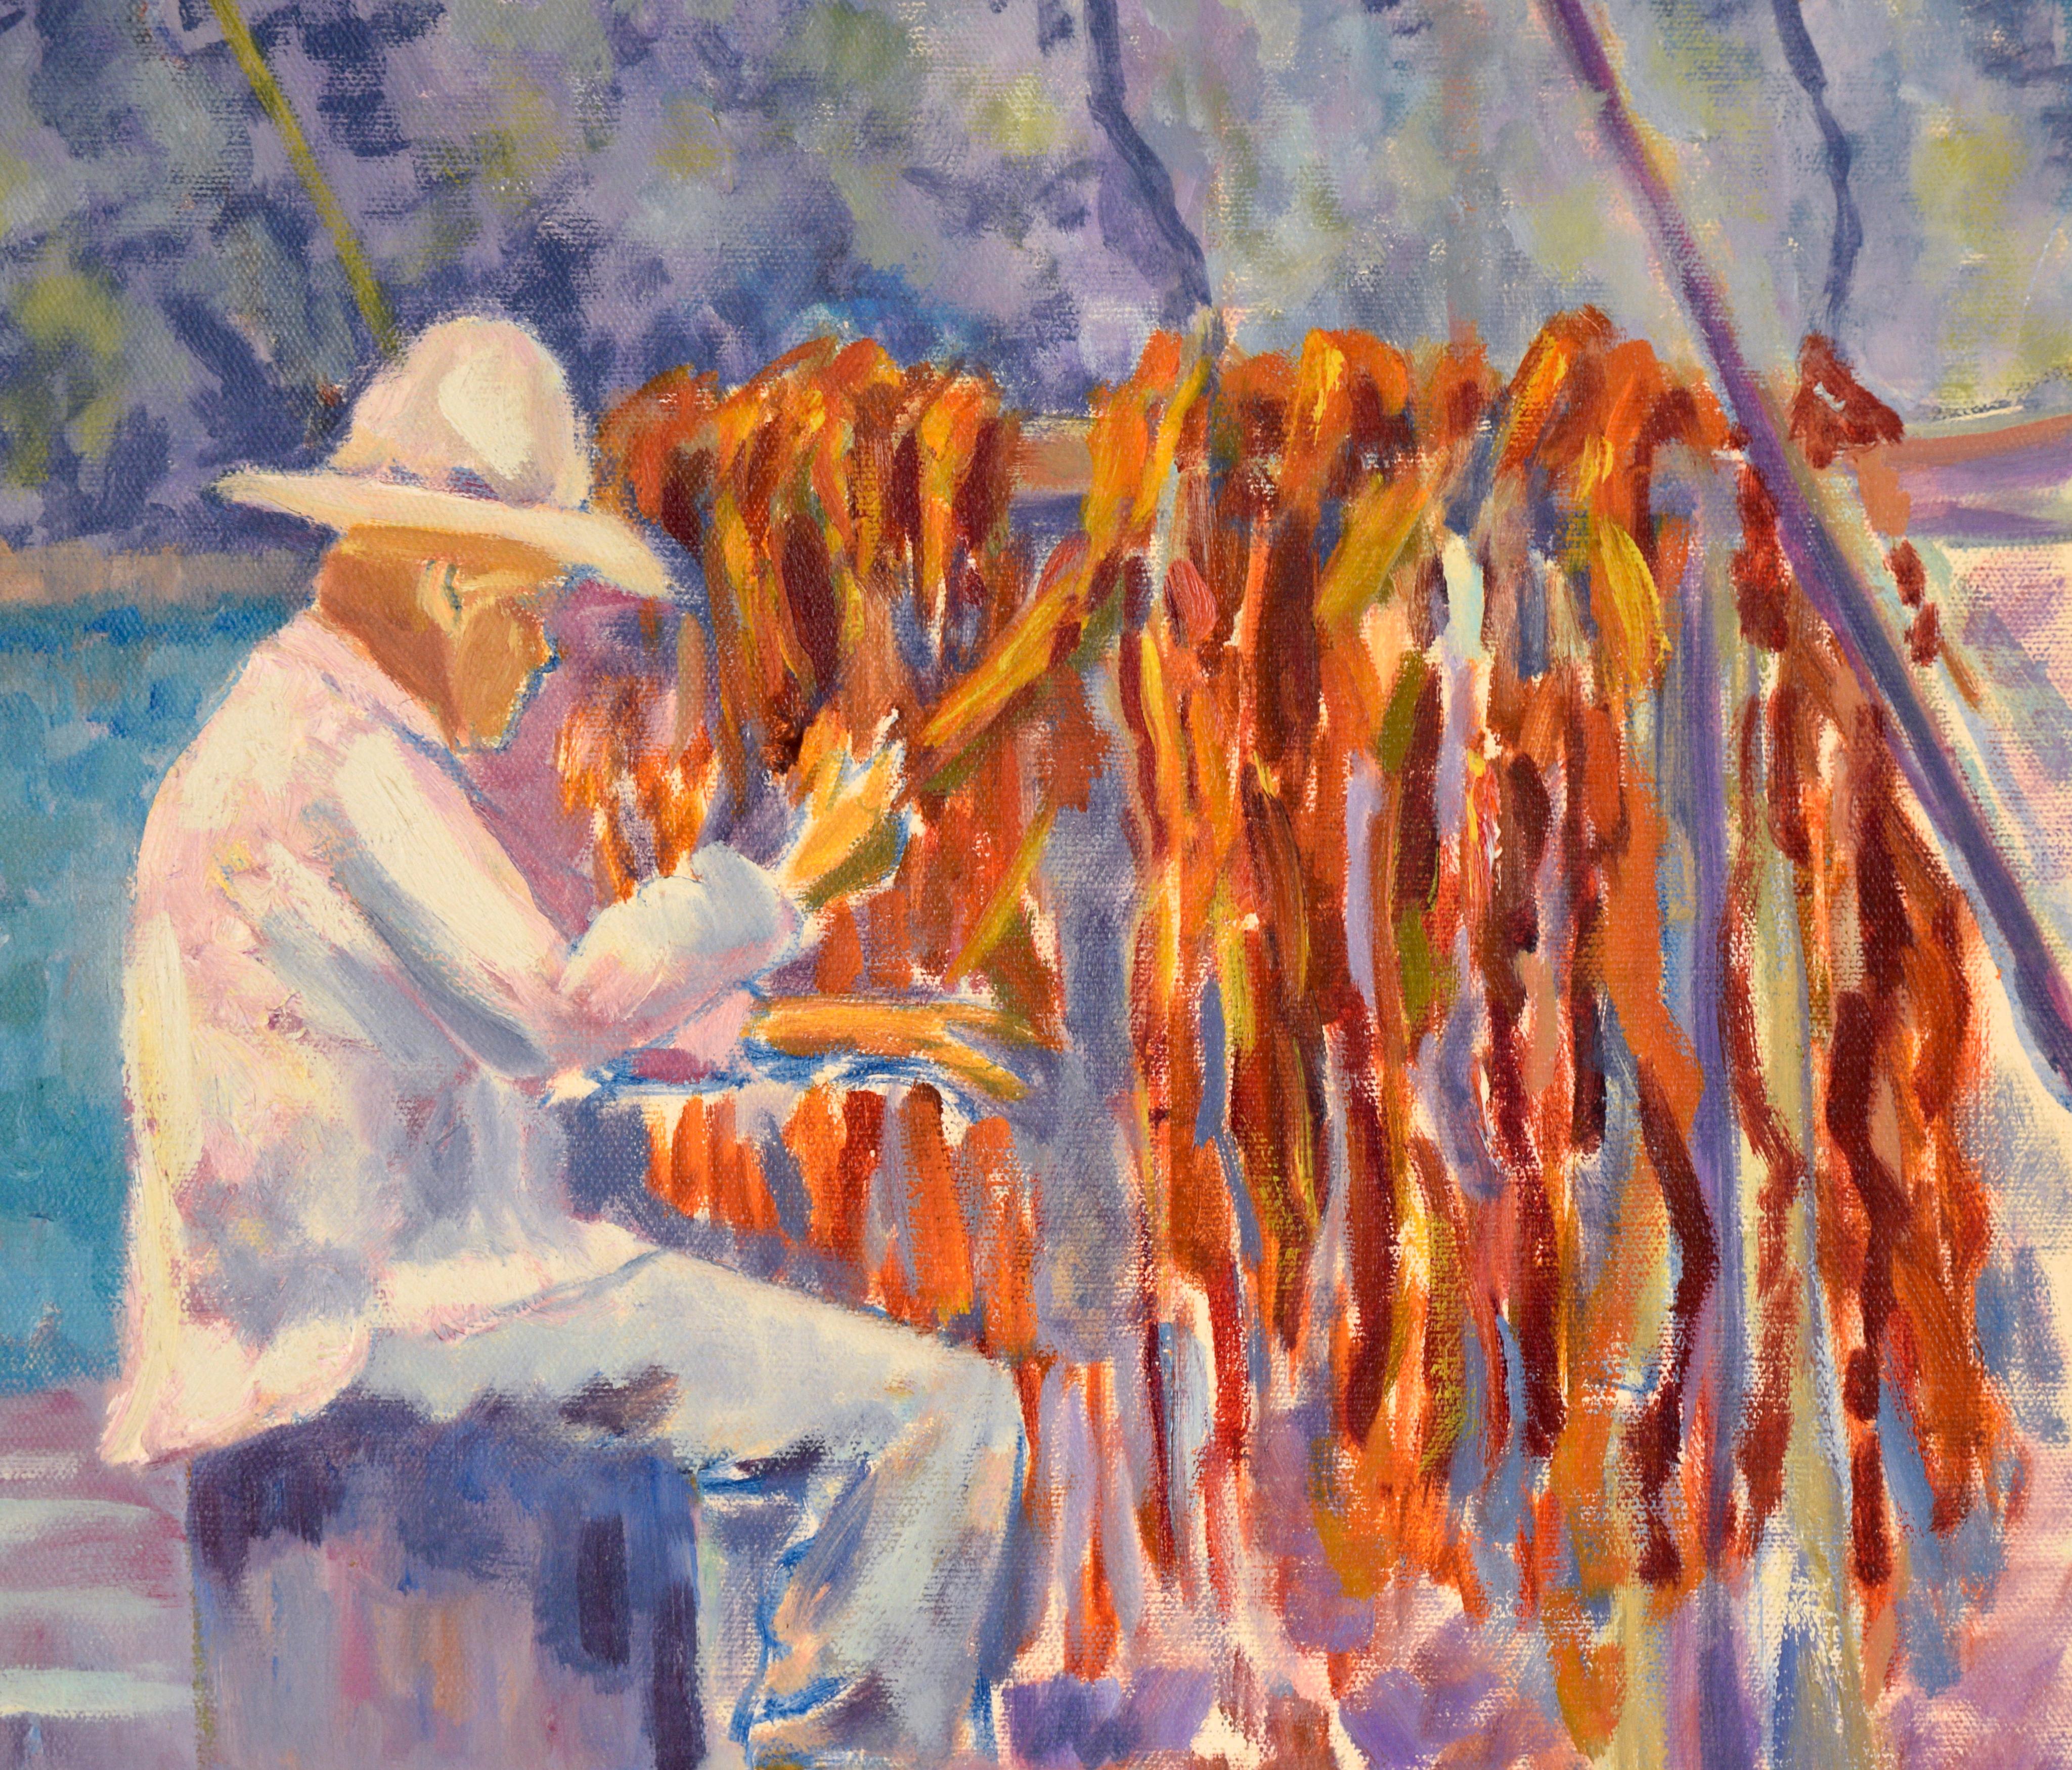 Drying Salmon Native American Smoke Tent - Figurative Oil on Canvas  - Brown Figurative Painting by Unknown